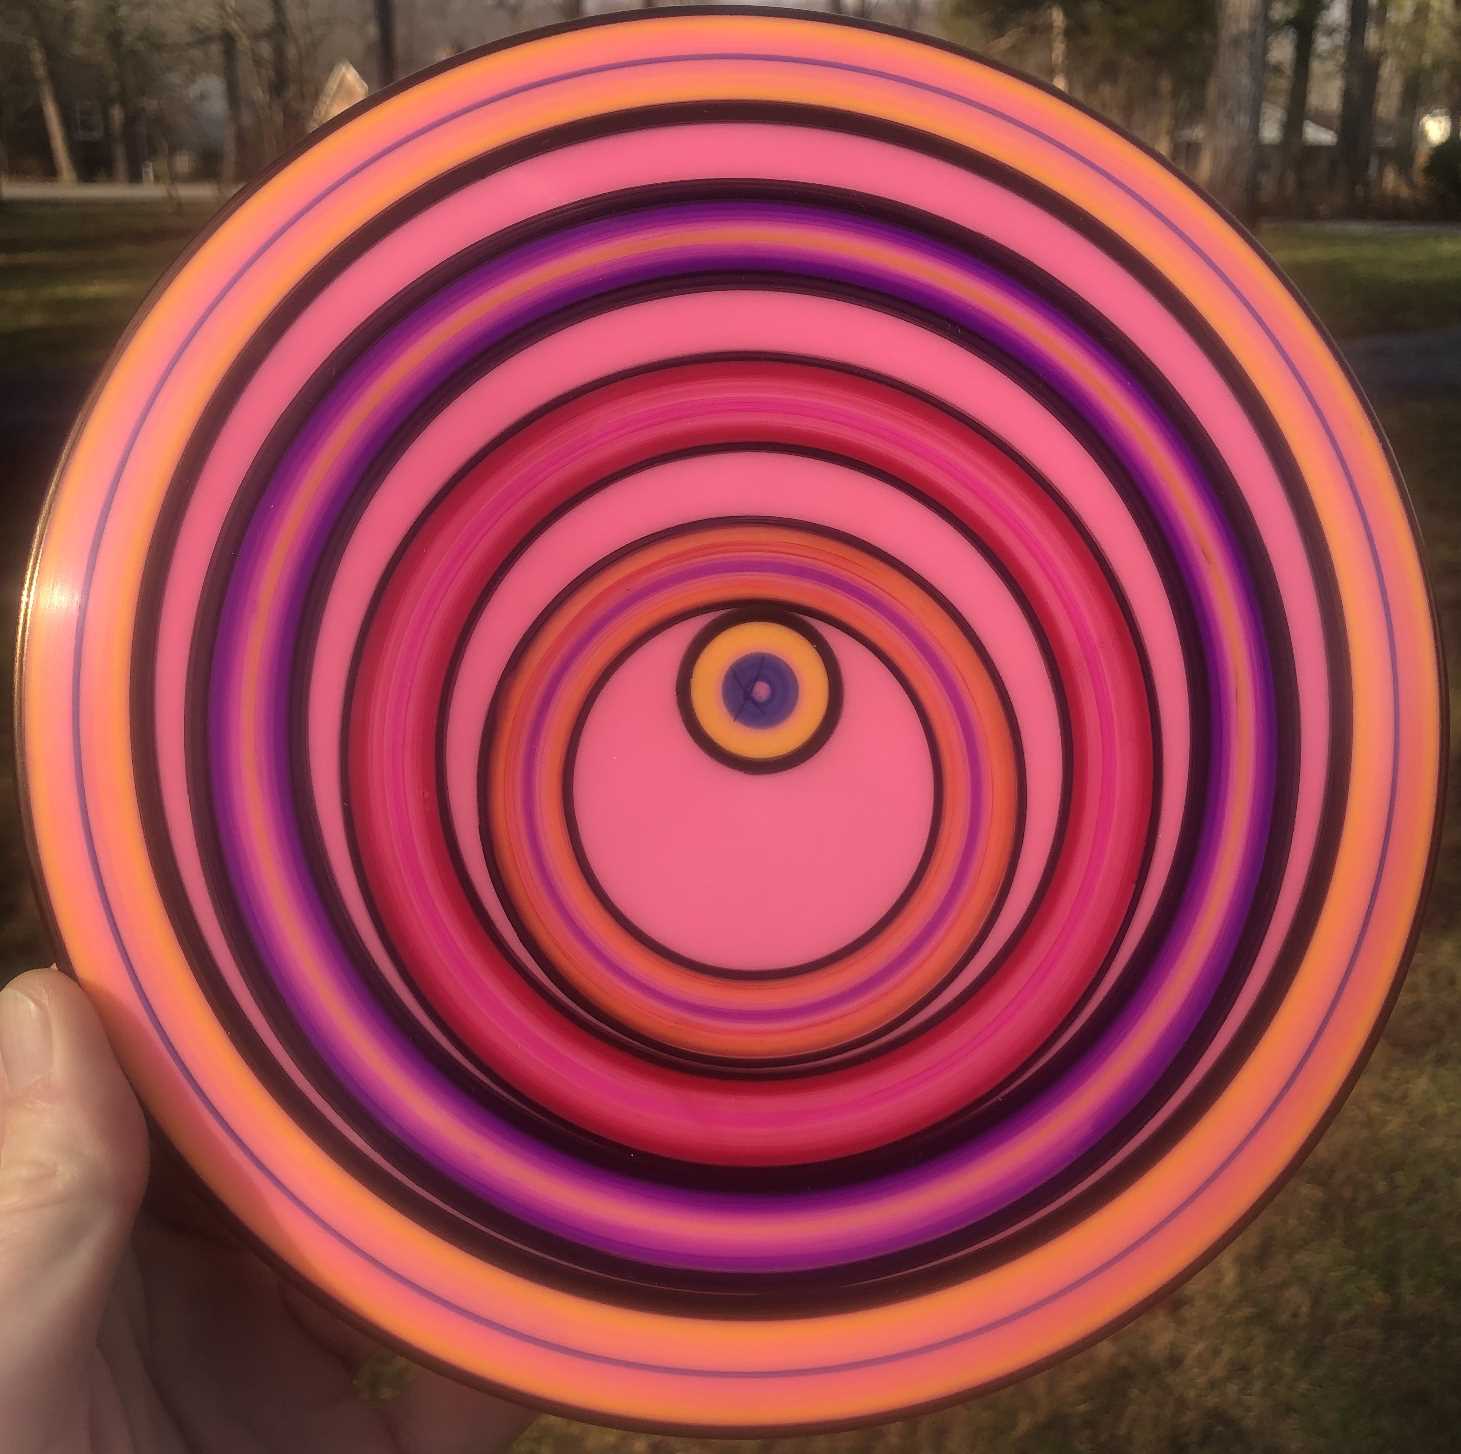 Off-Center Spin